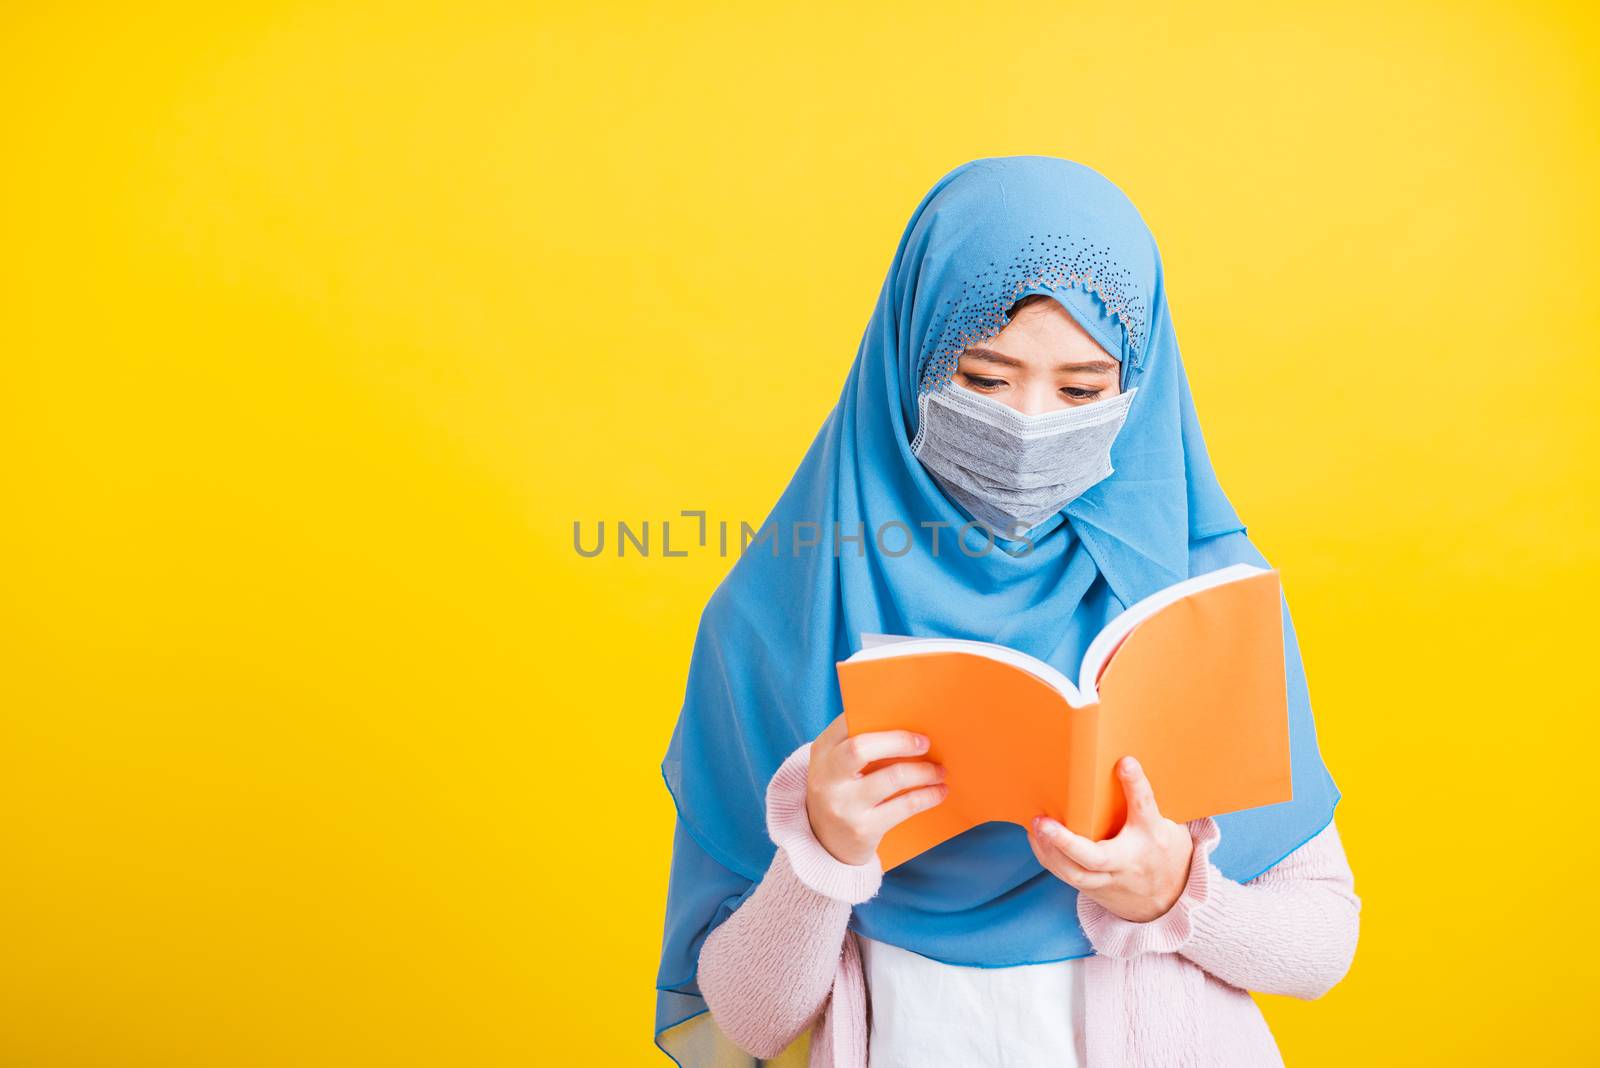 Asian Muslim Arab, Portrait of happy beautiful young woman religious wear veil hijab and face mask protective to prevent coronavirus she hold book on hand and open reding it on yellow, Back to college